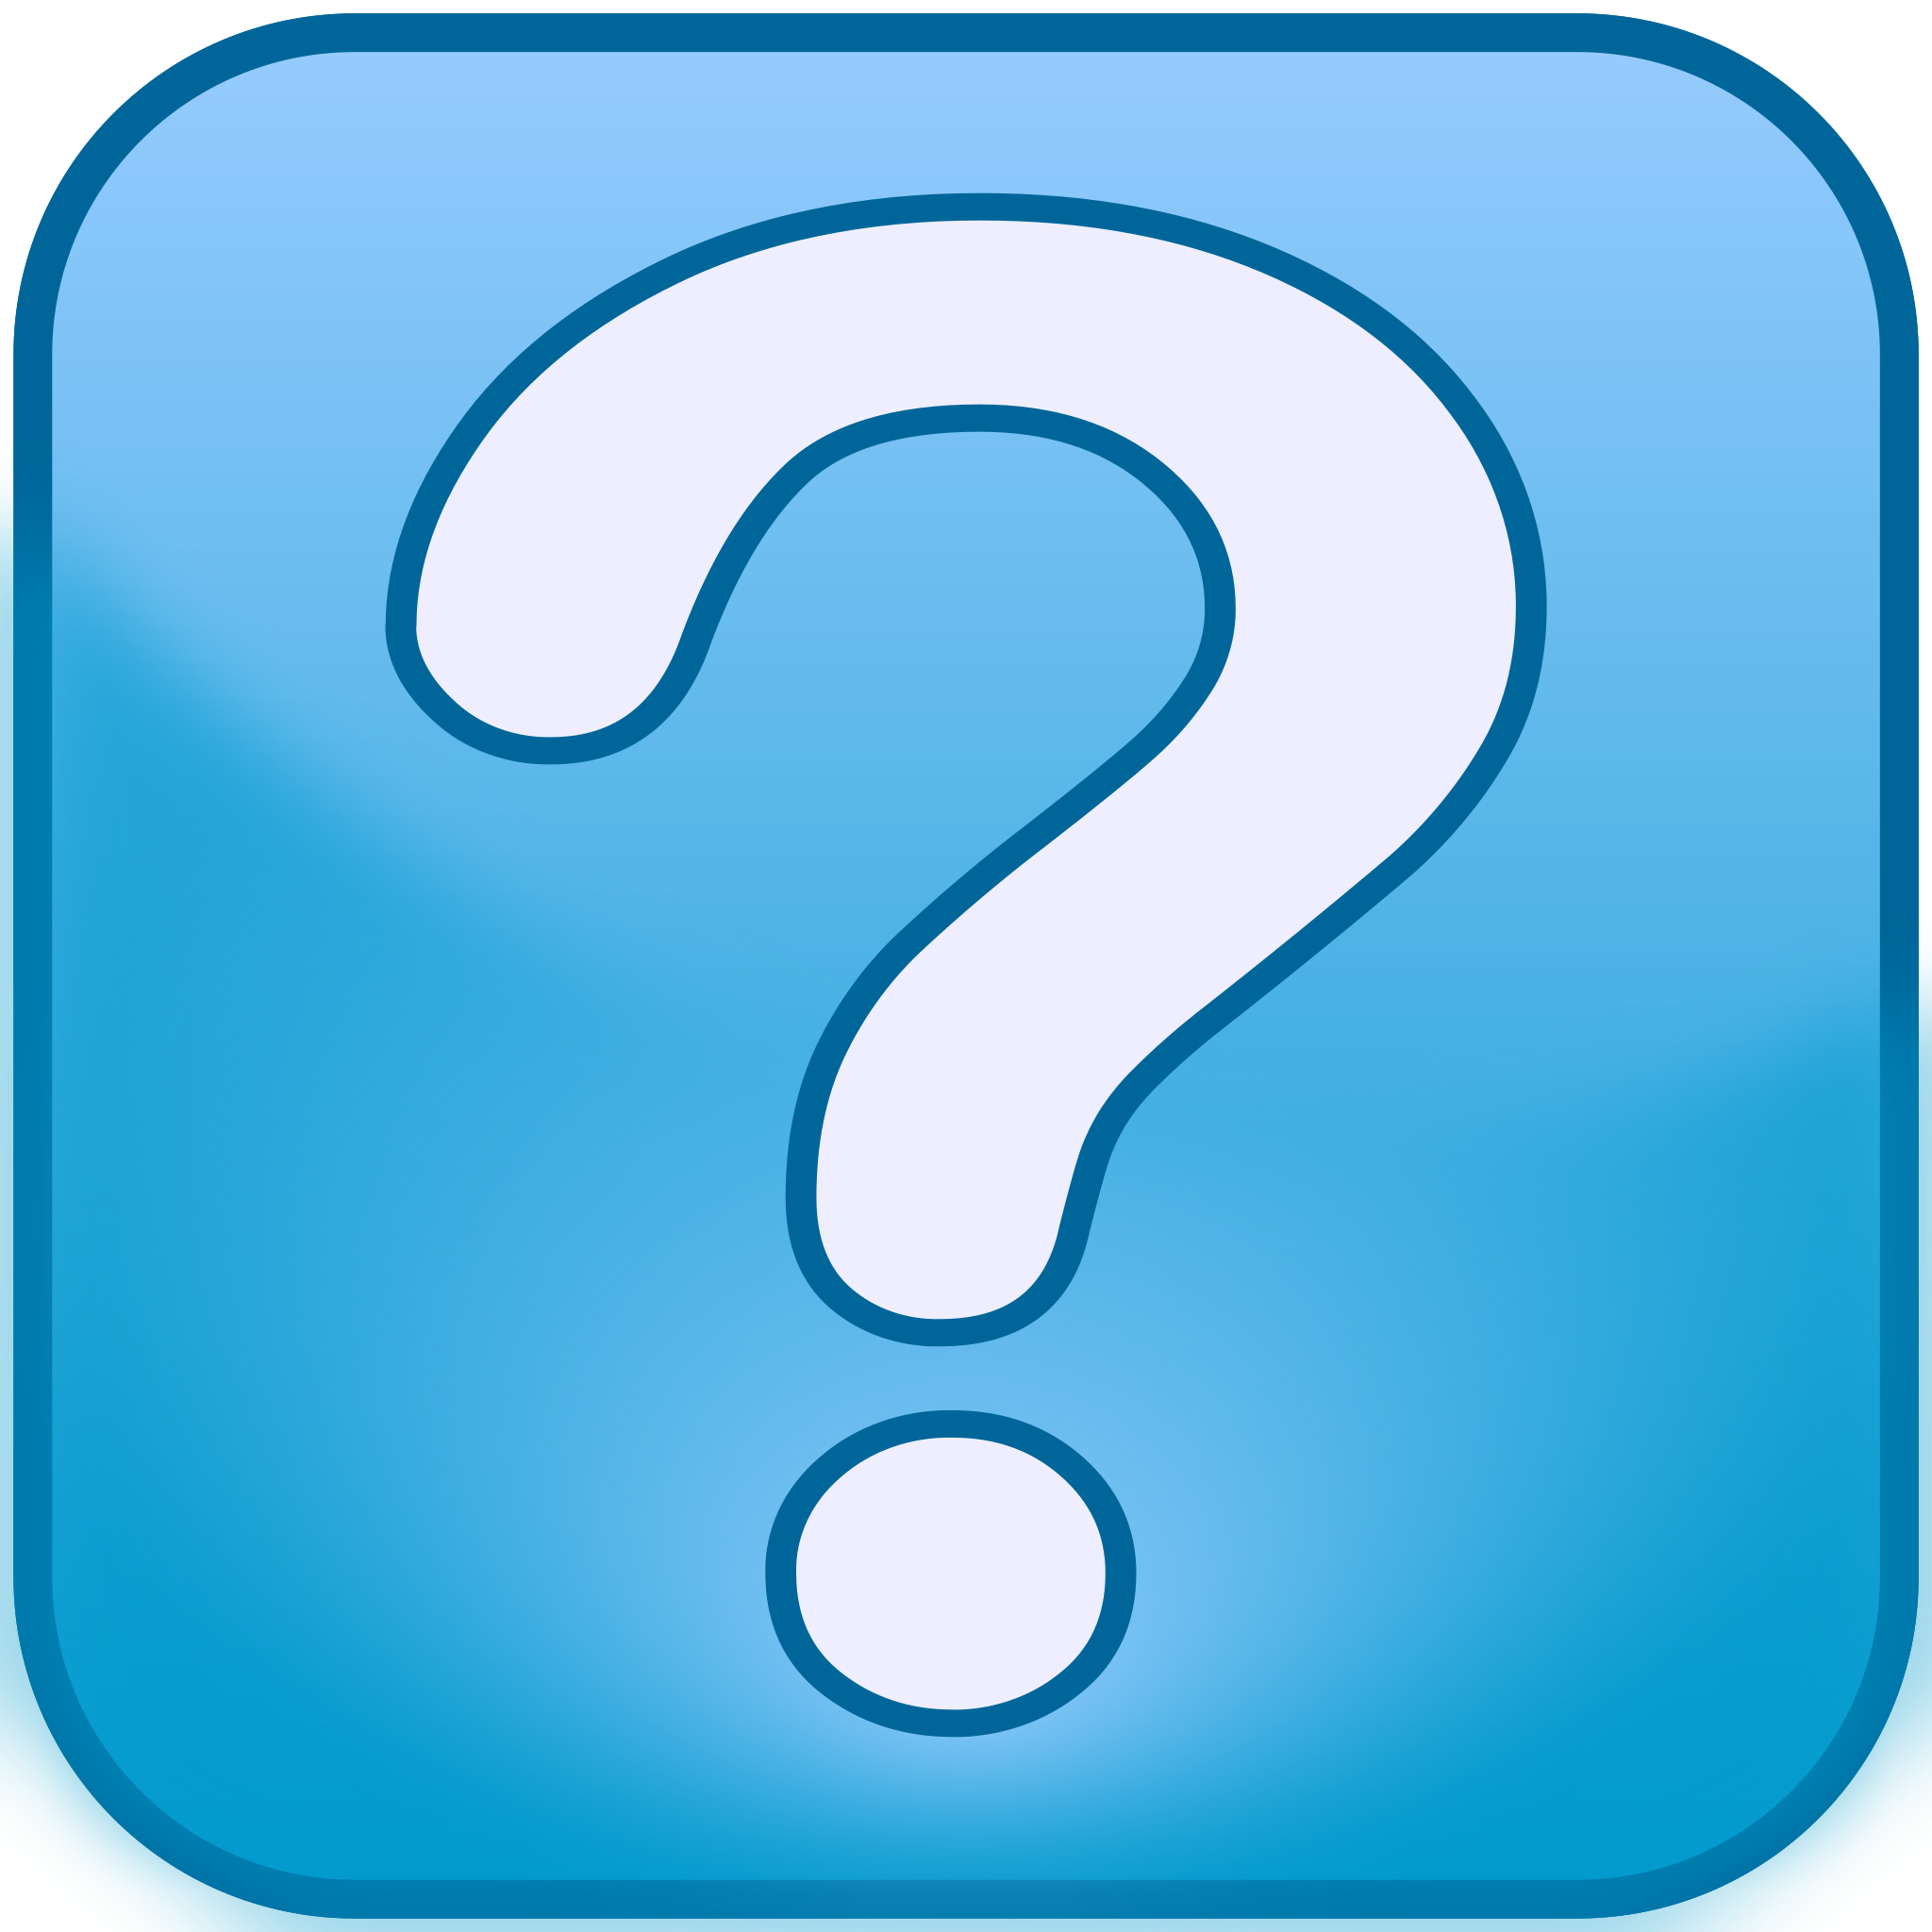 2048px-Question_Mark_Icon_-_Blue_Box_wit